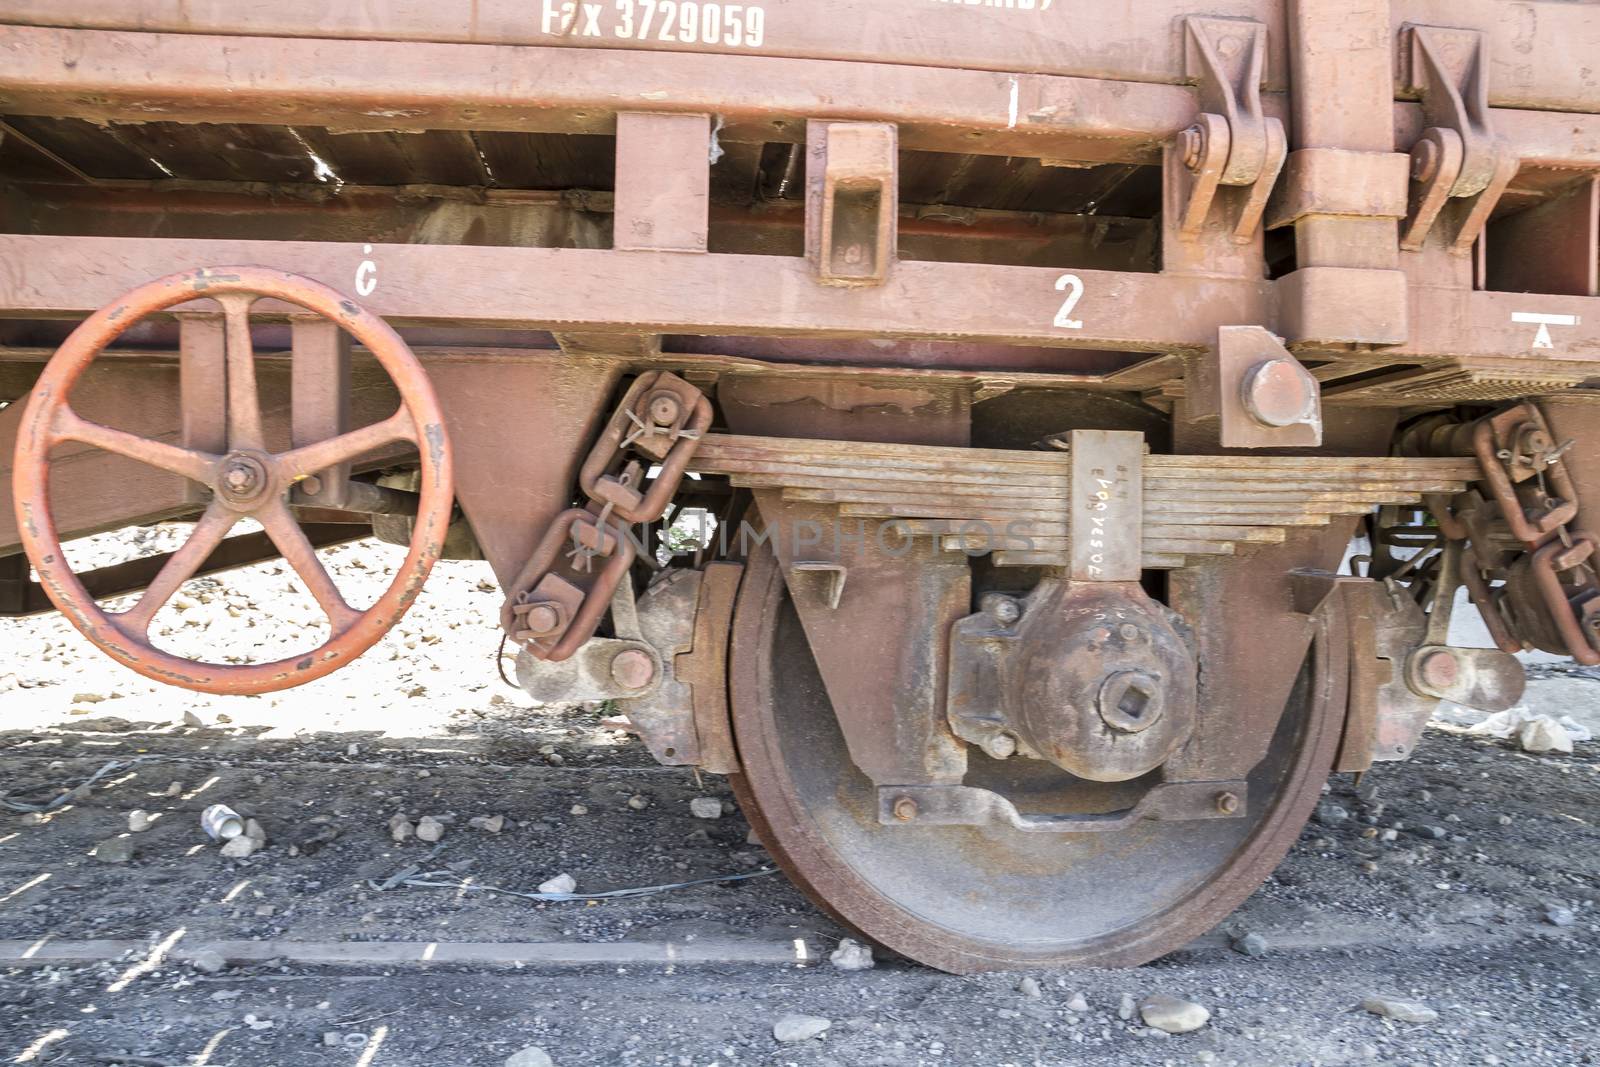 wheels, old freight train, metal machinery details by FernandoCortes